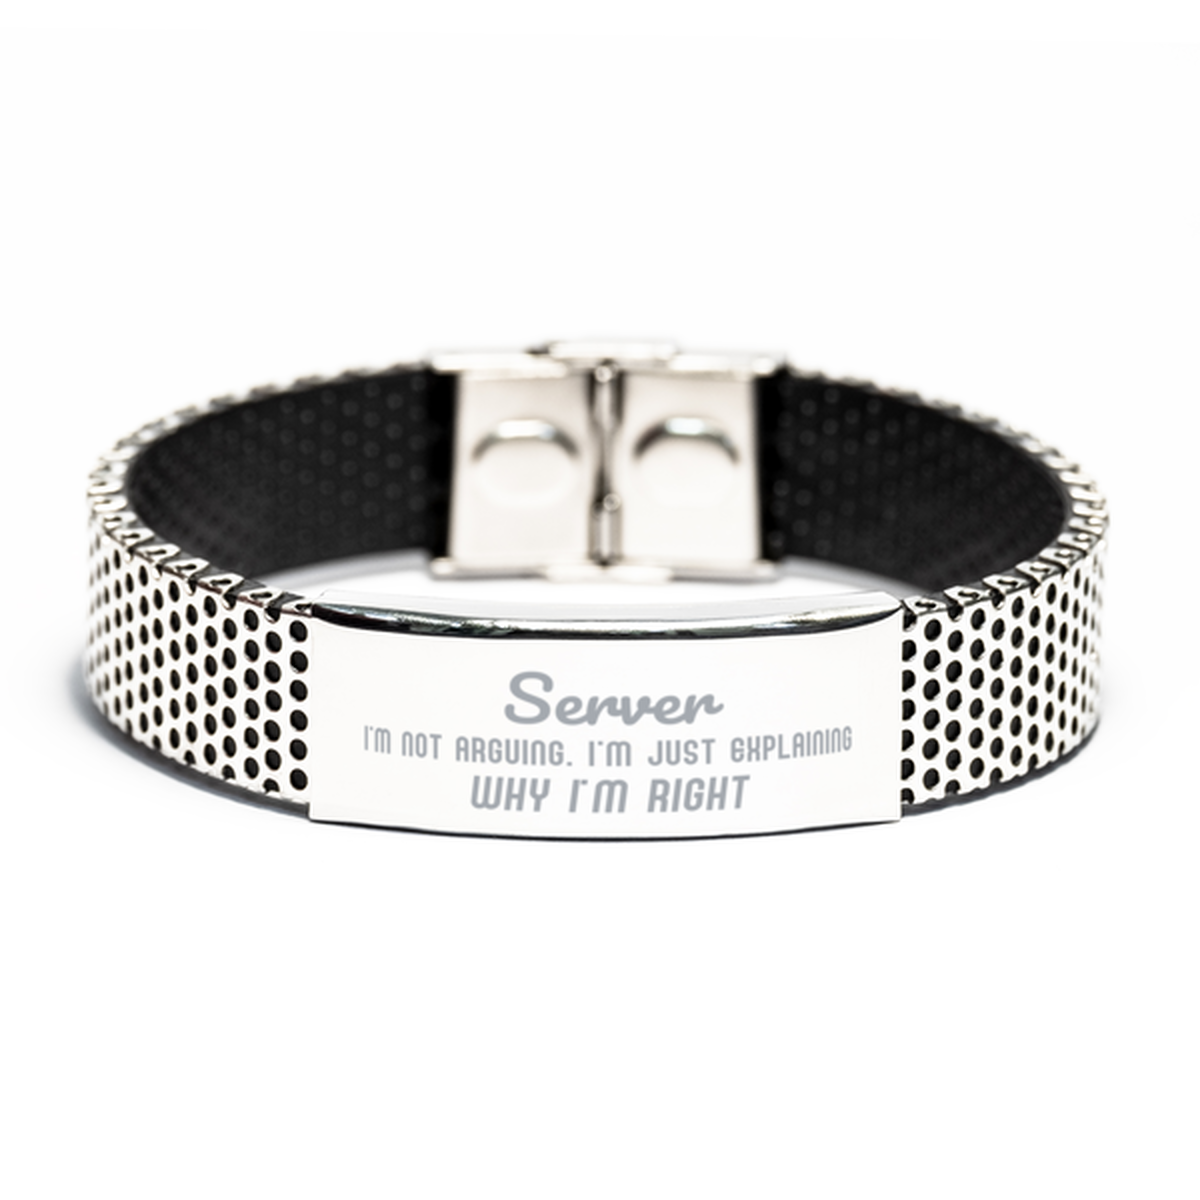 Server I'm not Arguing. I'm Just Explaining Why I'm RIGHT Stainless Steel Bracelet, Funny Saying Quote Server Gifts For Server Graduation Birthday Christmas Gifts for Men Women Coworker